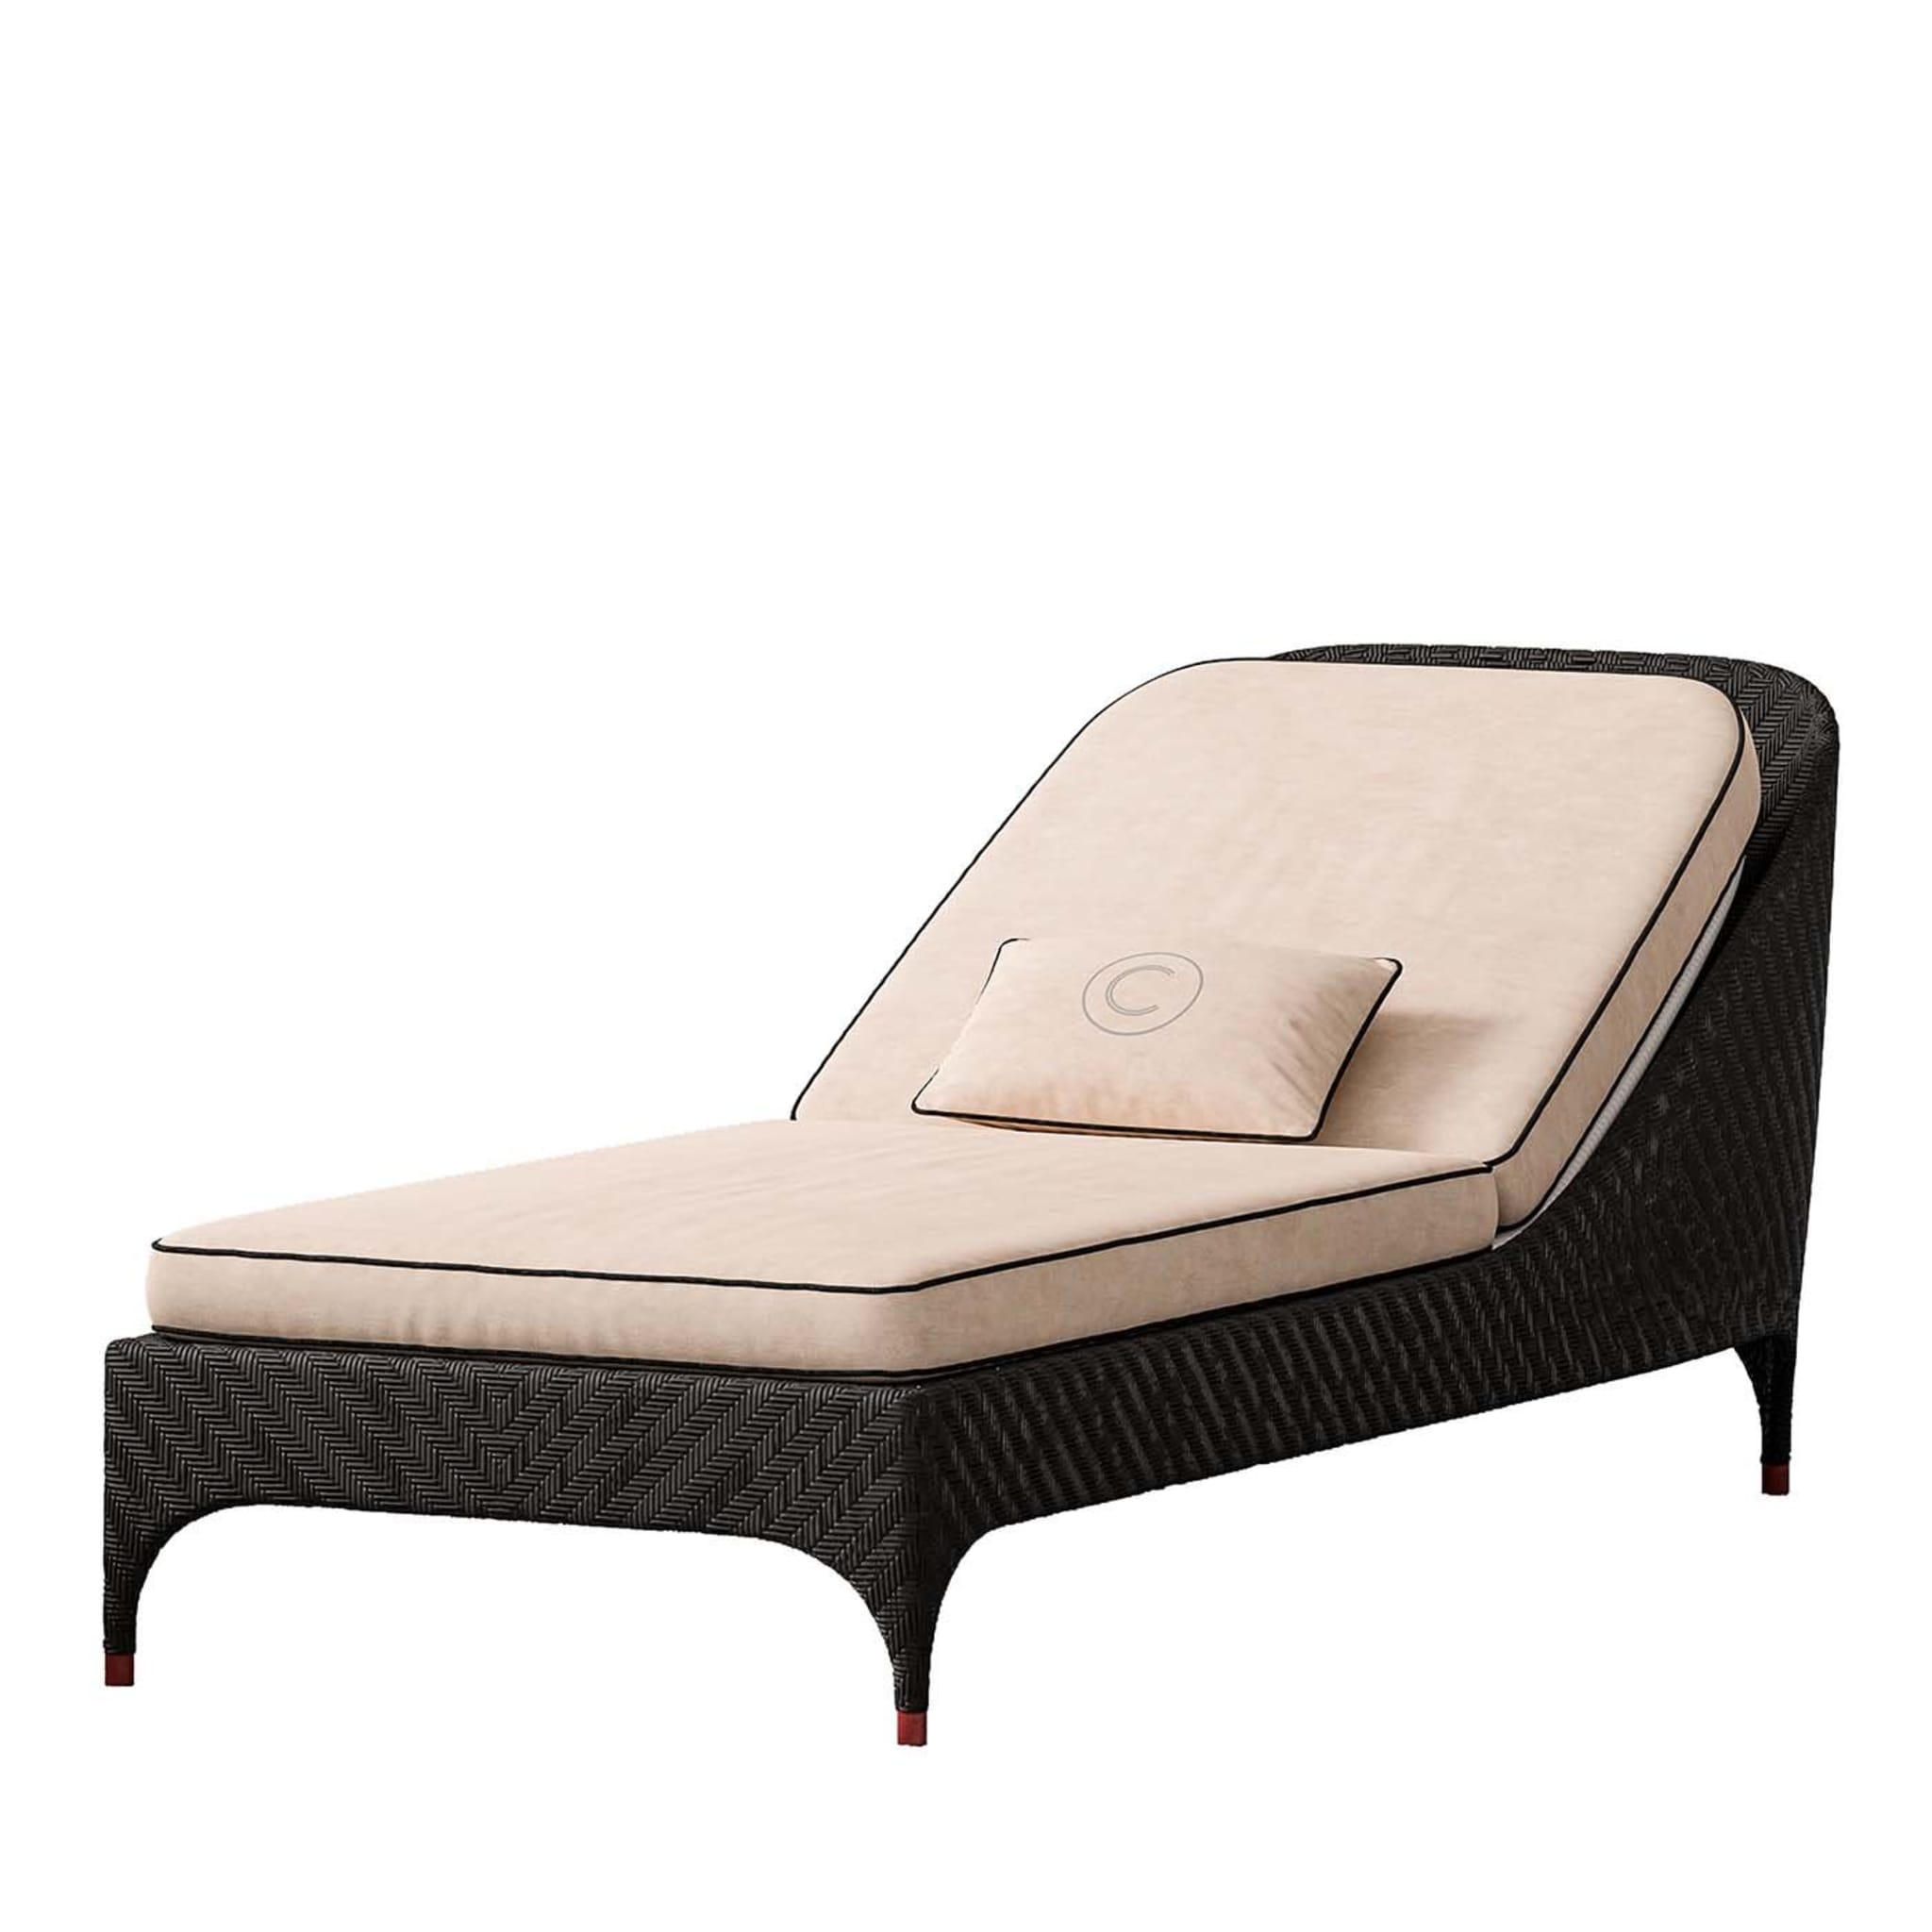 Black 1-Seater Sunbed with White Cushions - Main view